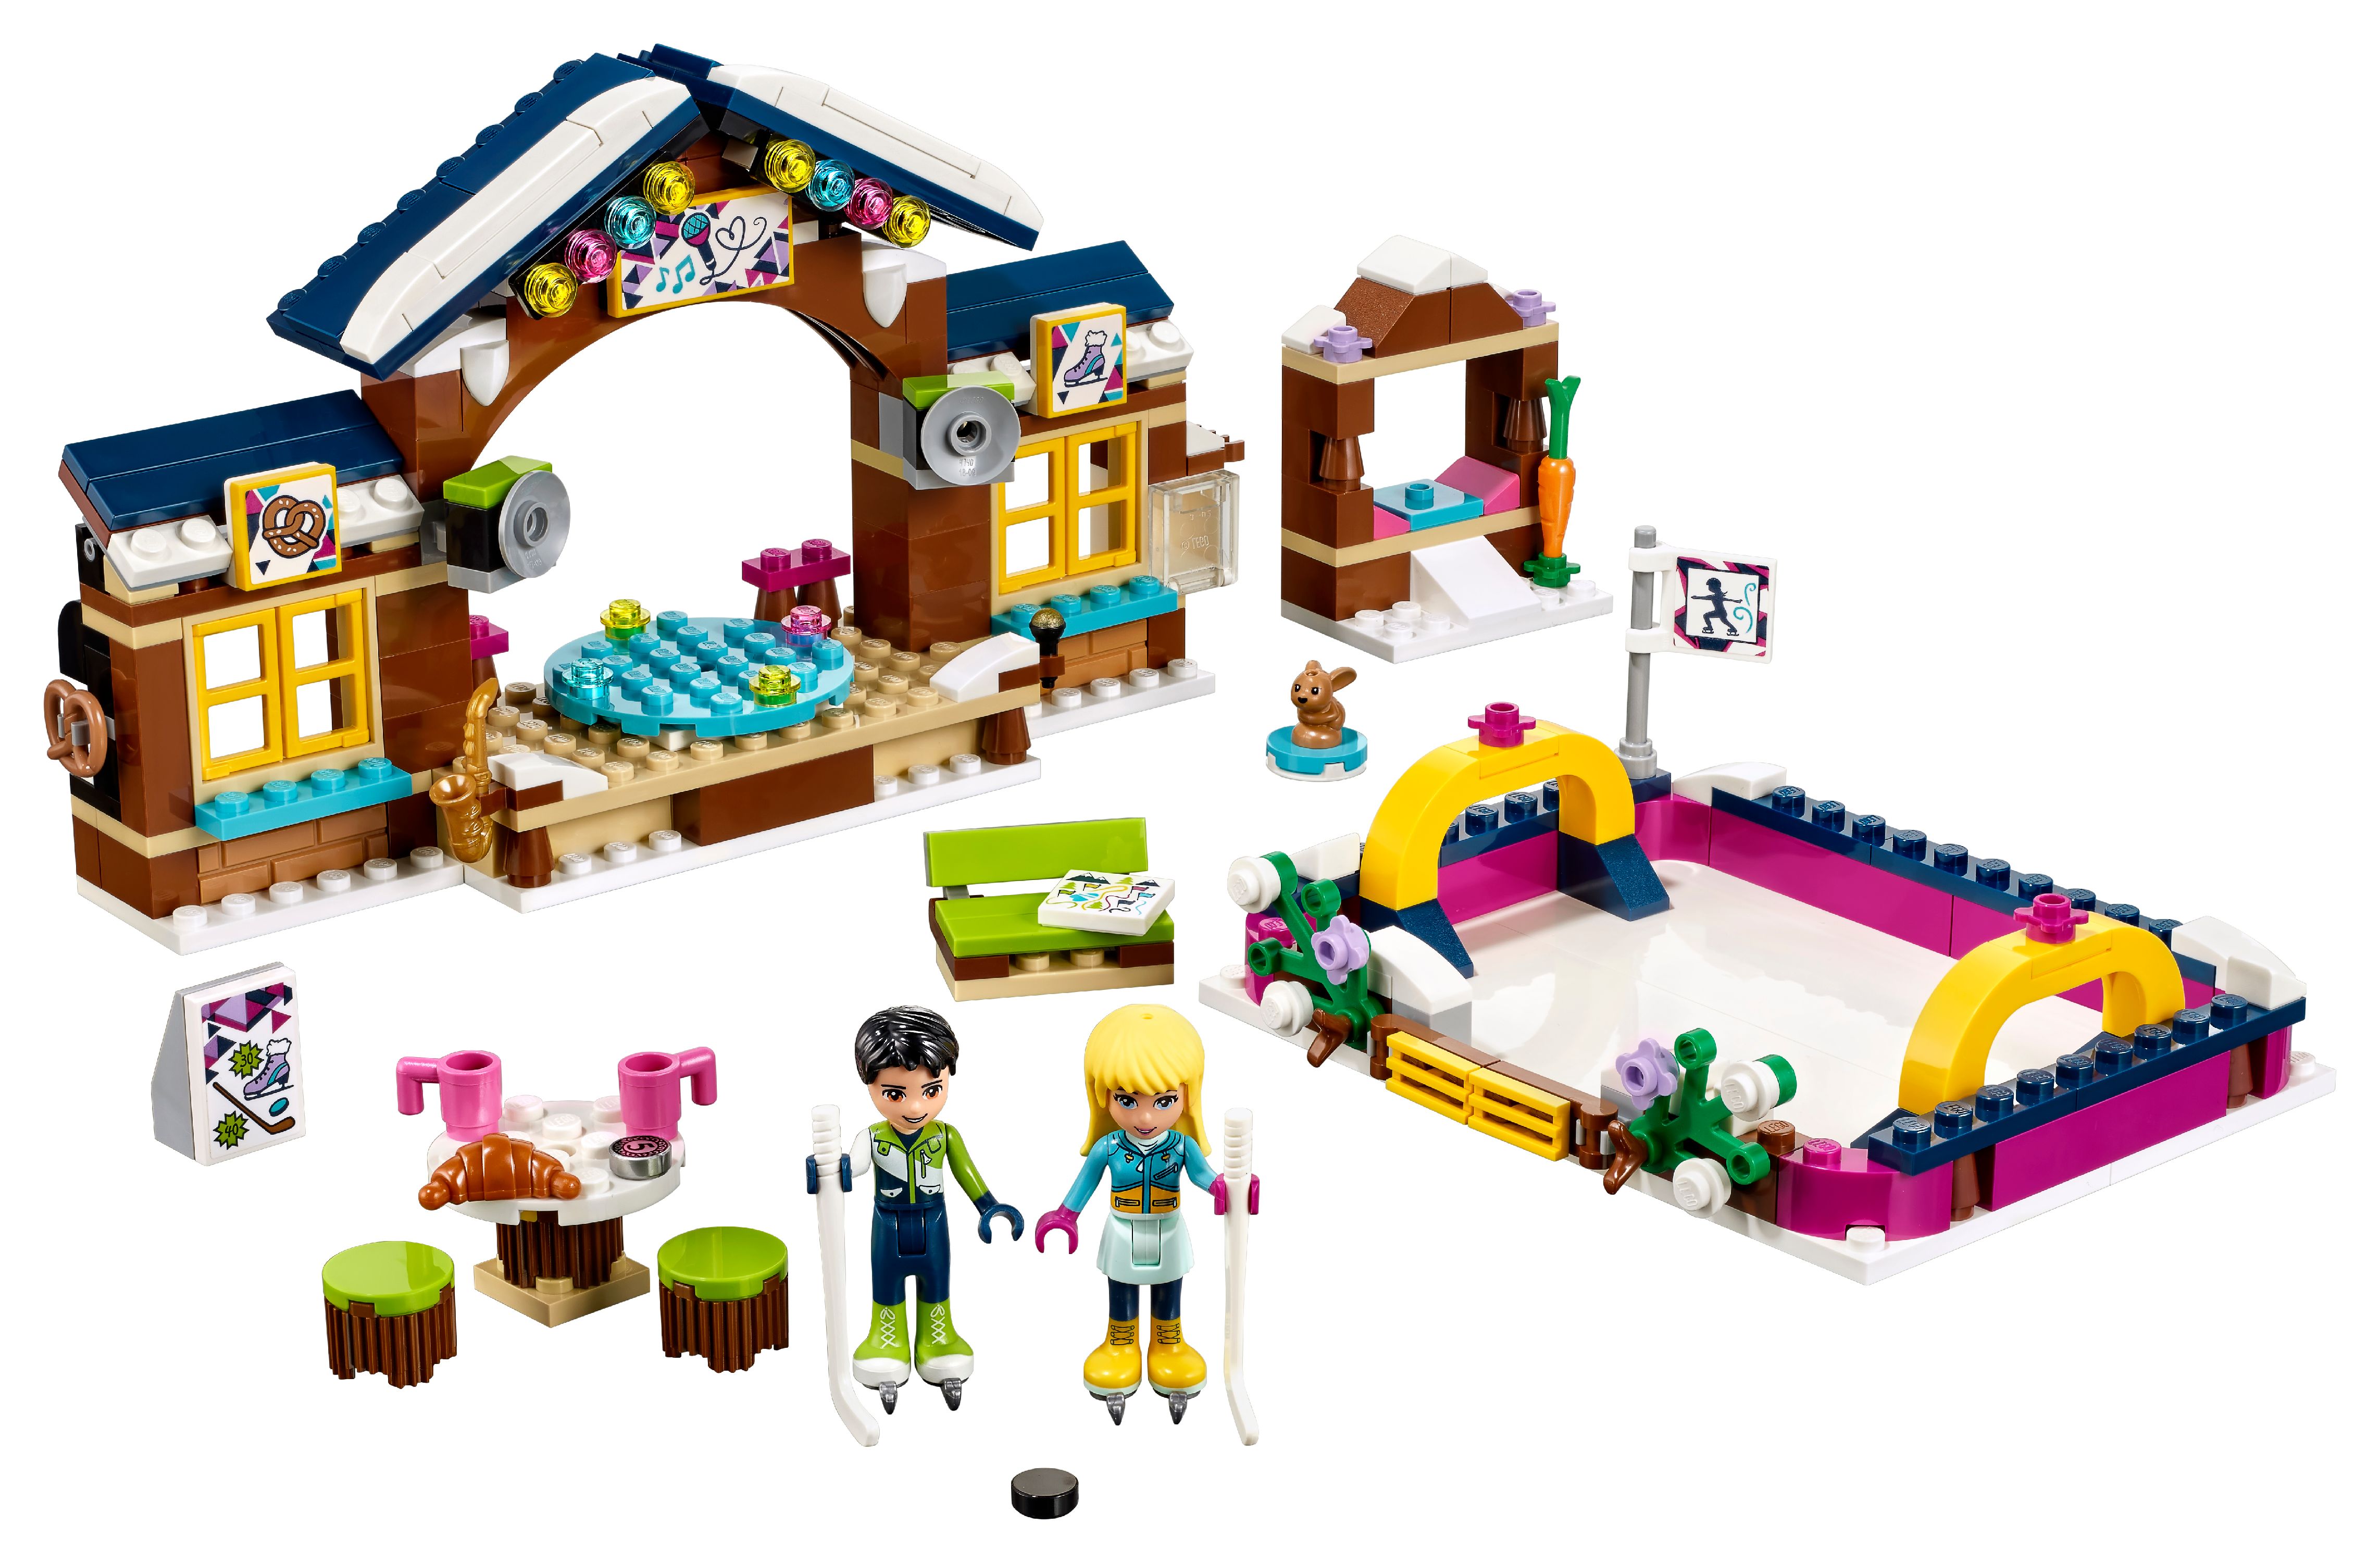 LEGO Friends Snow Resort Ice Rink 41322 (307 Pieces) - image 3 of 6